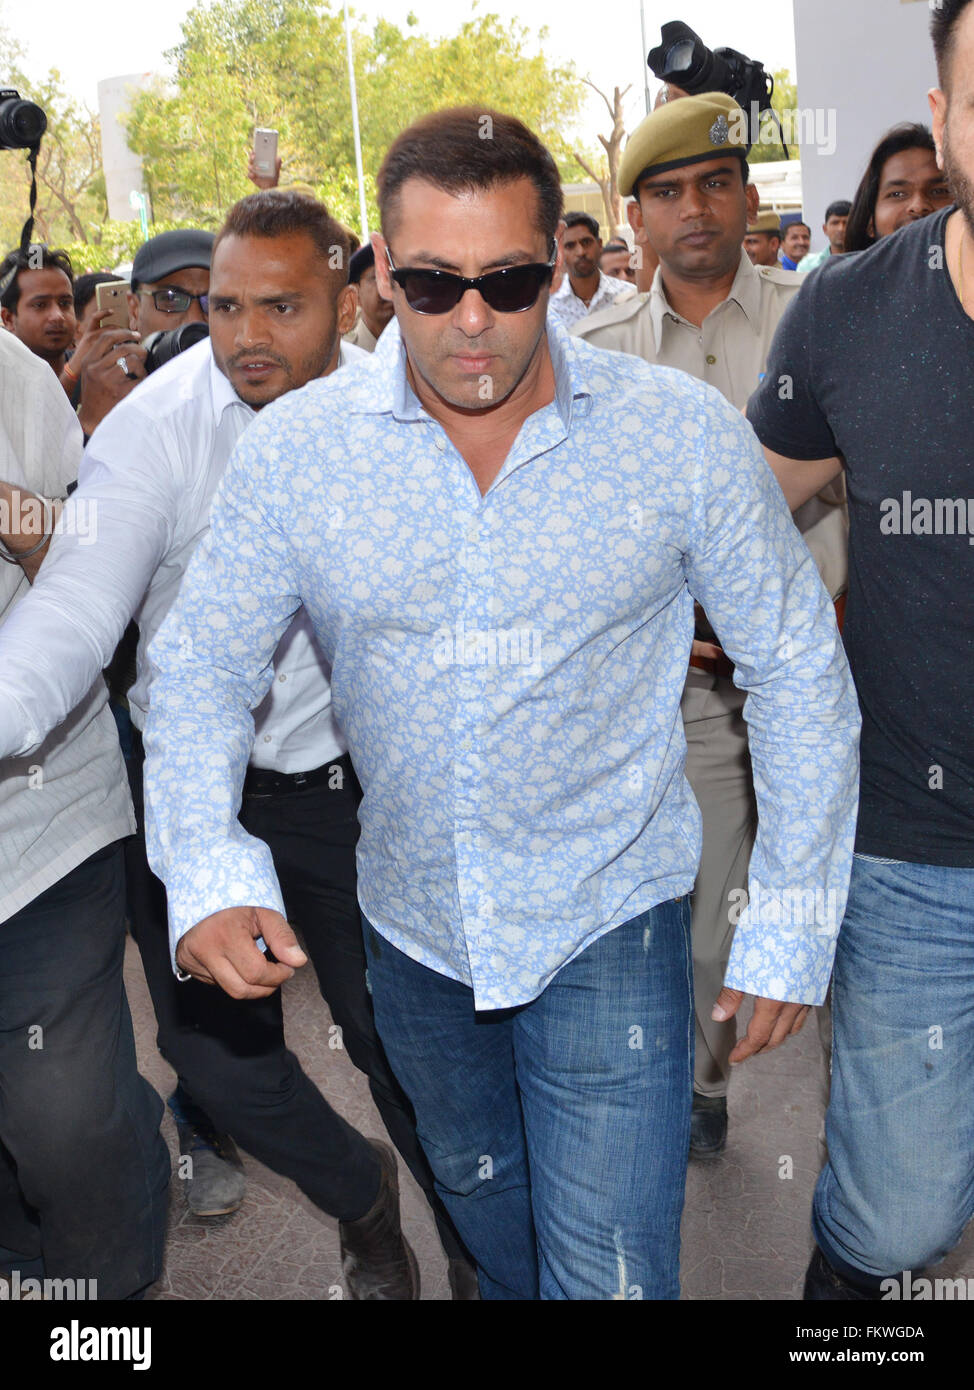 Jodhpur, India. 10th Mar, 2016. Bollywood film star Salman Khan leaves after a produce at Jodhpur court in the Arms Act case against him connected to the poaching of chinkara blackbuck in Jodhpur, India. The actor is accused of hunting and killing the endangered deer while shooting his film Hum ''Saath Saath Hain'' in Jodhpur, Rajasthan, India. Credit:  Mohammed Sharif/Pacific Press/Alamy Live News Stock Photo